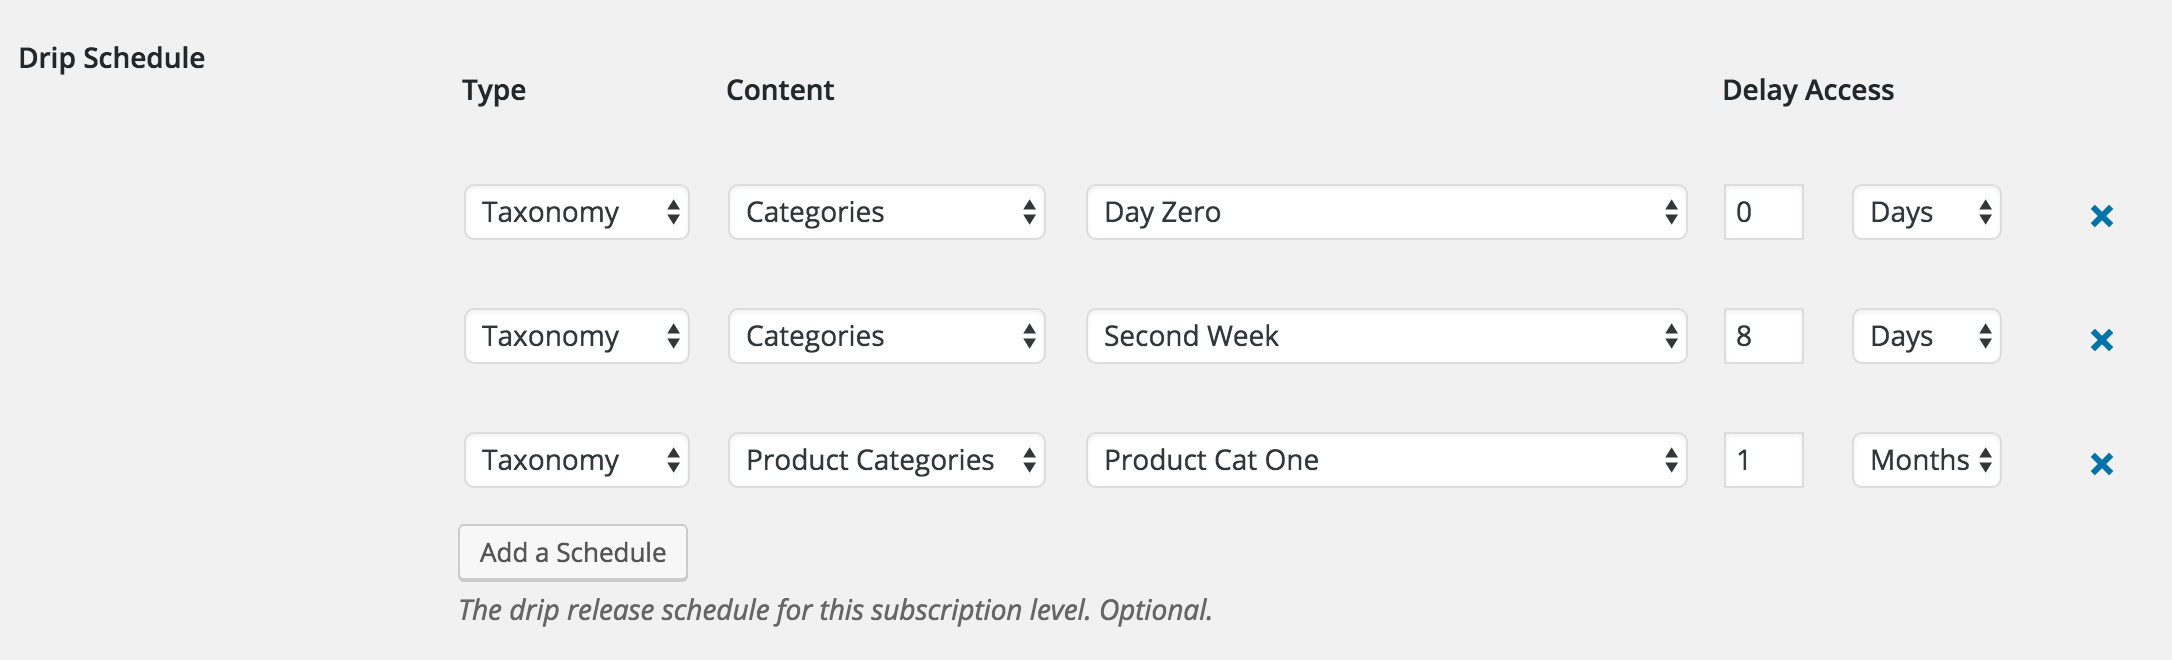 Taxonomy drip content settings on the Subscription Level edit screen.